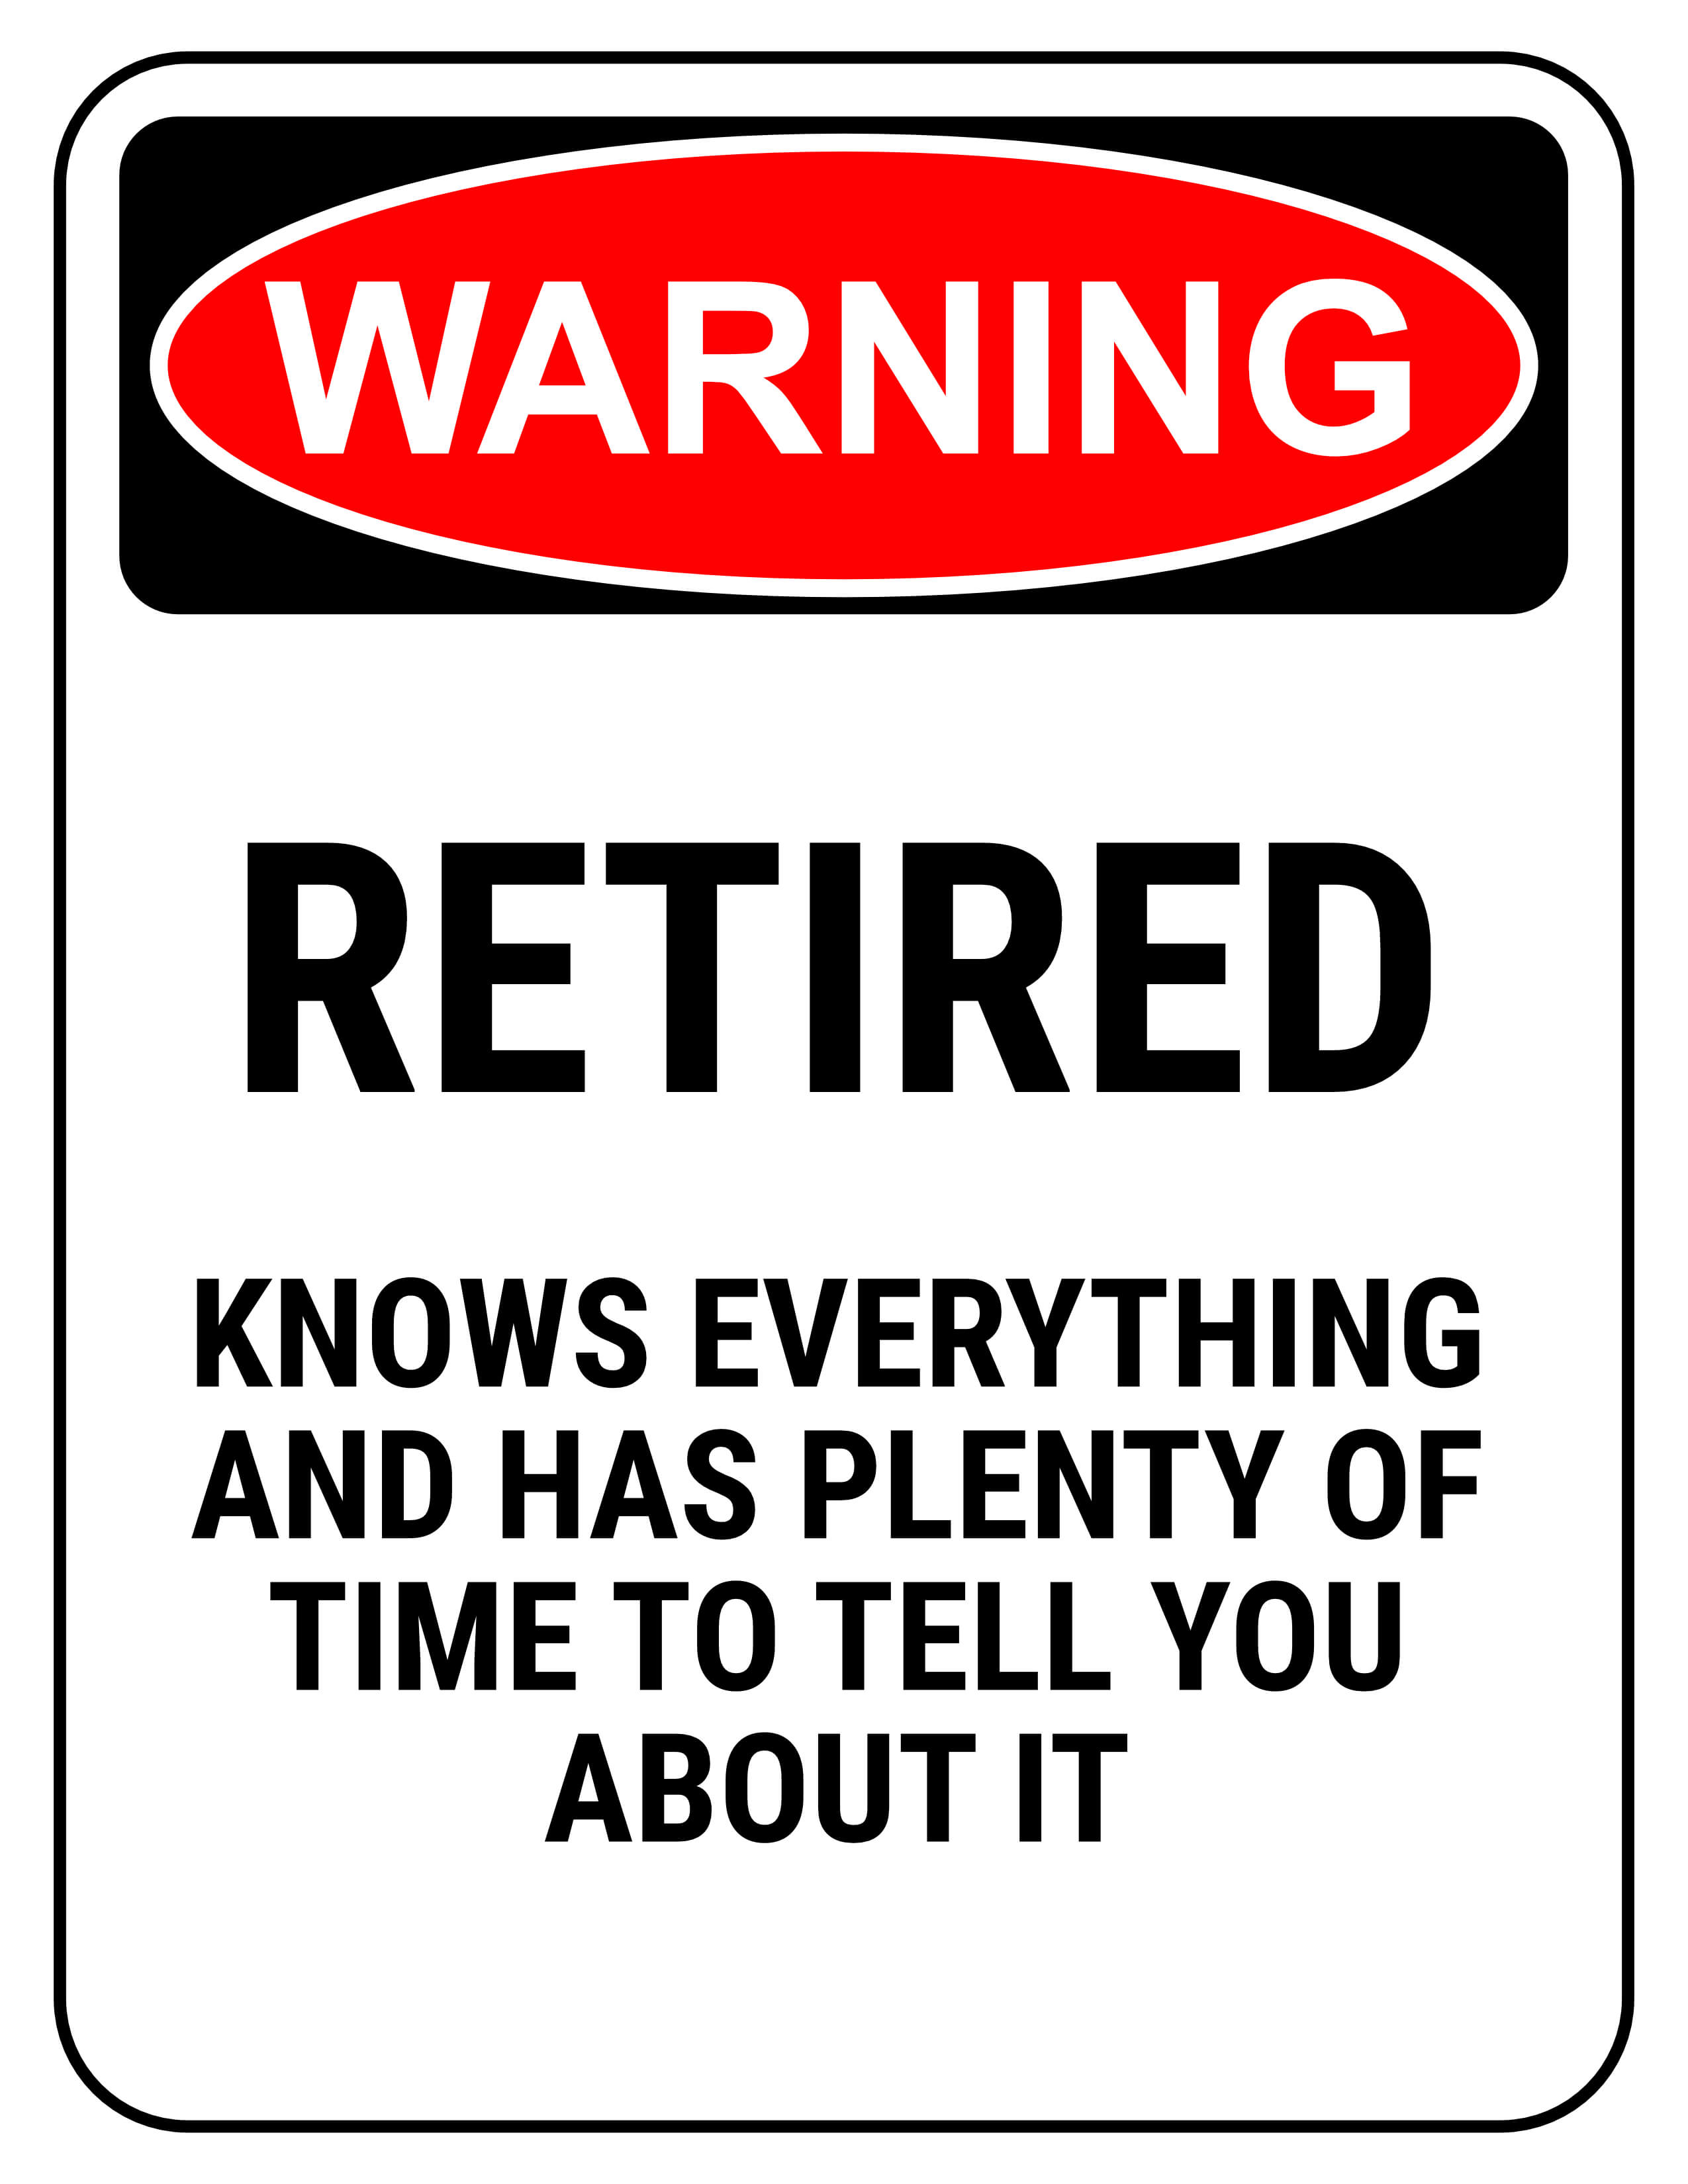 https://resources.homemade-gifts-made-easy.com/funny-safety-signs/funny-safety-sign-warning-retired-2550x3300.jpg